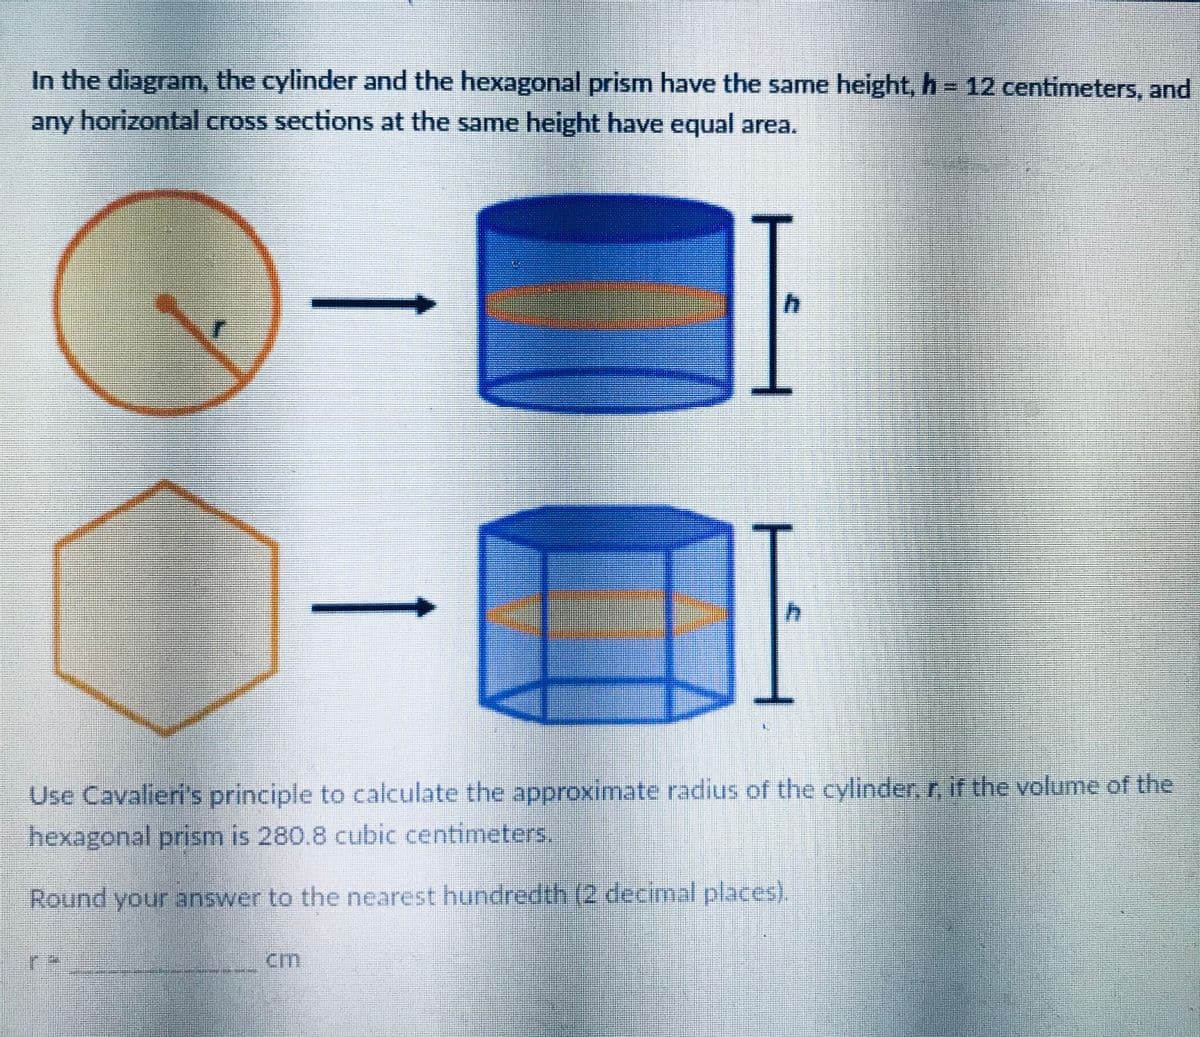 In the diagram, the cylinder and the hexagonal prism have the same height, h = 12 centimeters, and
any horizontal cross sections at the same height have equal area.
h.
Use Cavalieri's principle to calculate the approximate radius of the cylinder, r, if the volume of the
hexagonal prism is 280.8 cubic centimeters.
Round your answer to the nearest hundredth (2 decimal places).
cm
